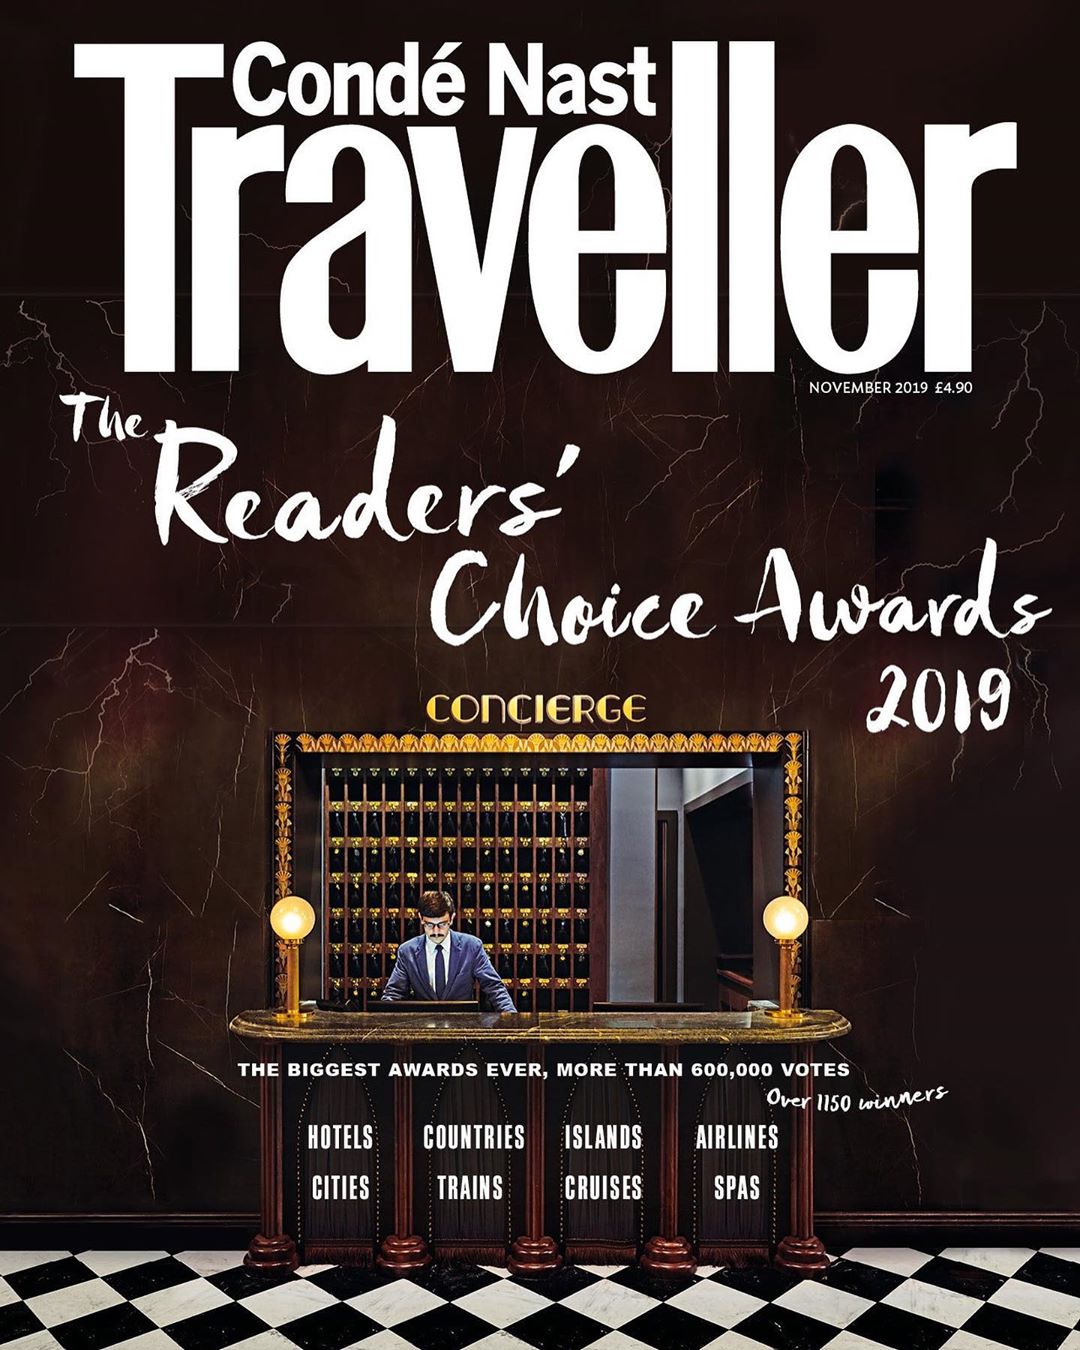 Congratulations to our fabulous clients who have all won in the @condenasttraveller Readers’ Choice Awards 2019 
</p>
				</div>
			</div>
		</div>
				
				
		<div class=